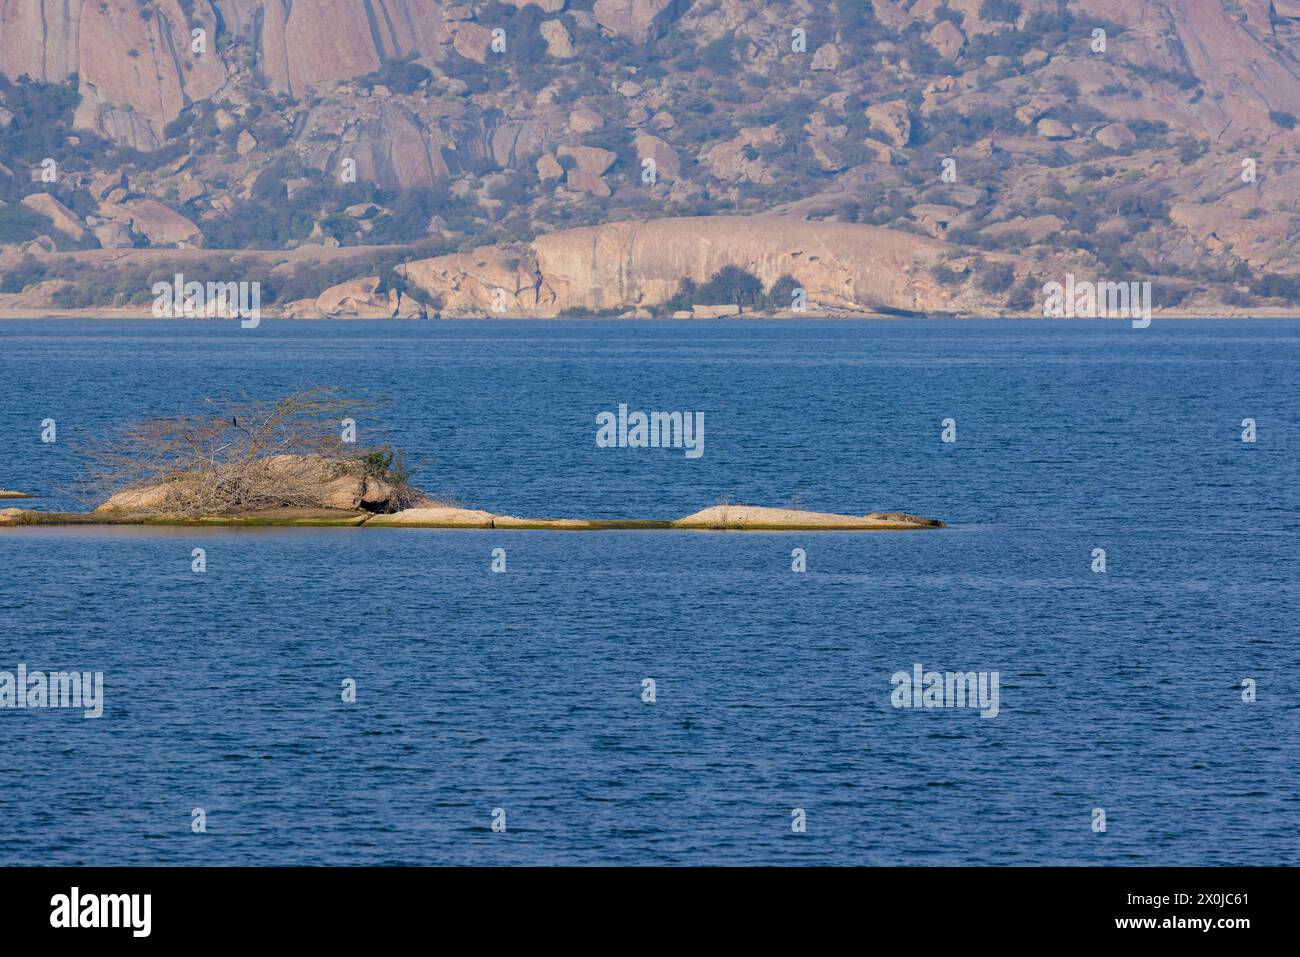 Distant view of a Crocodile basking on an islet in Jawai Dam - Rajasthan (India) Stock Photo